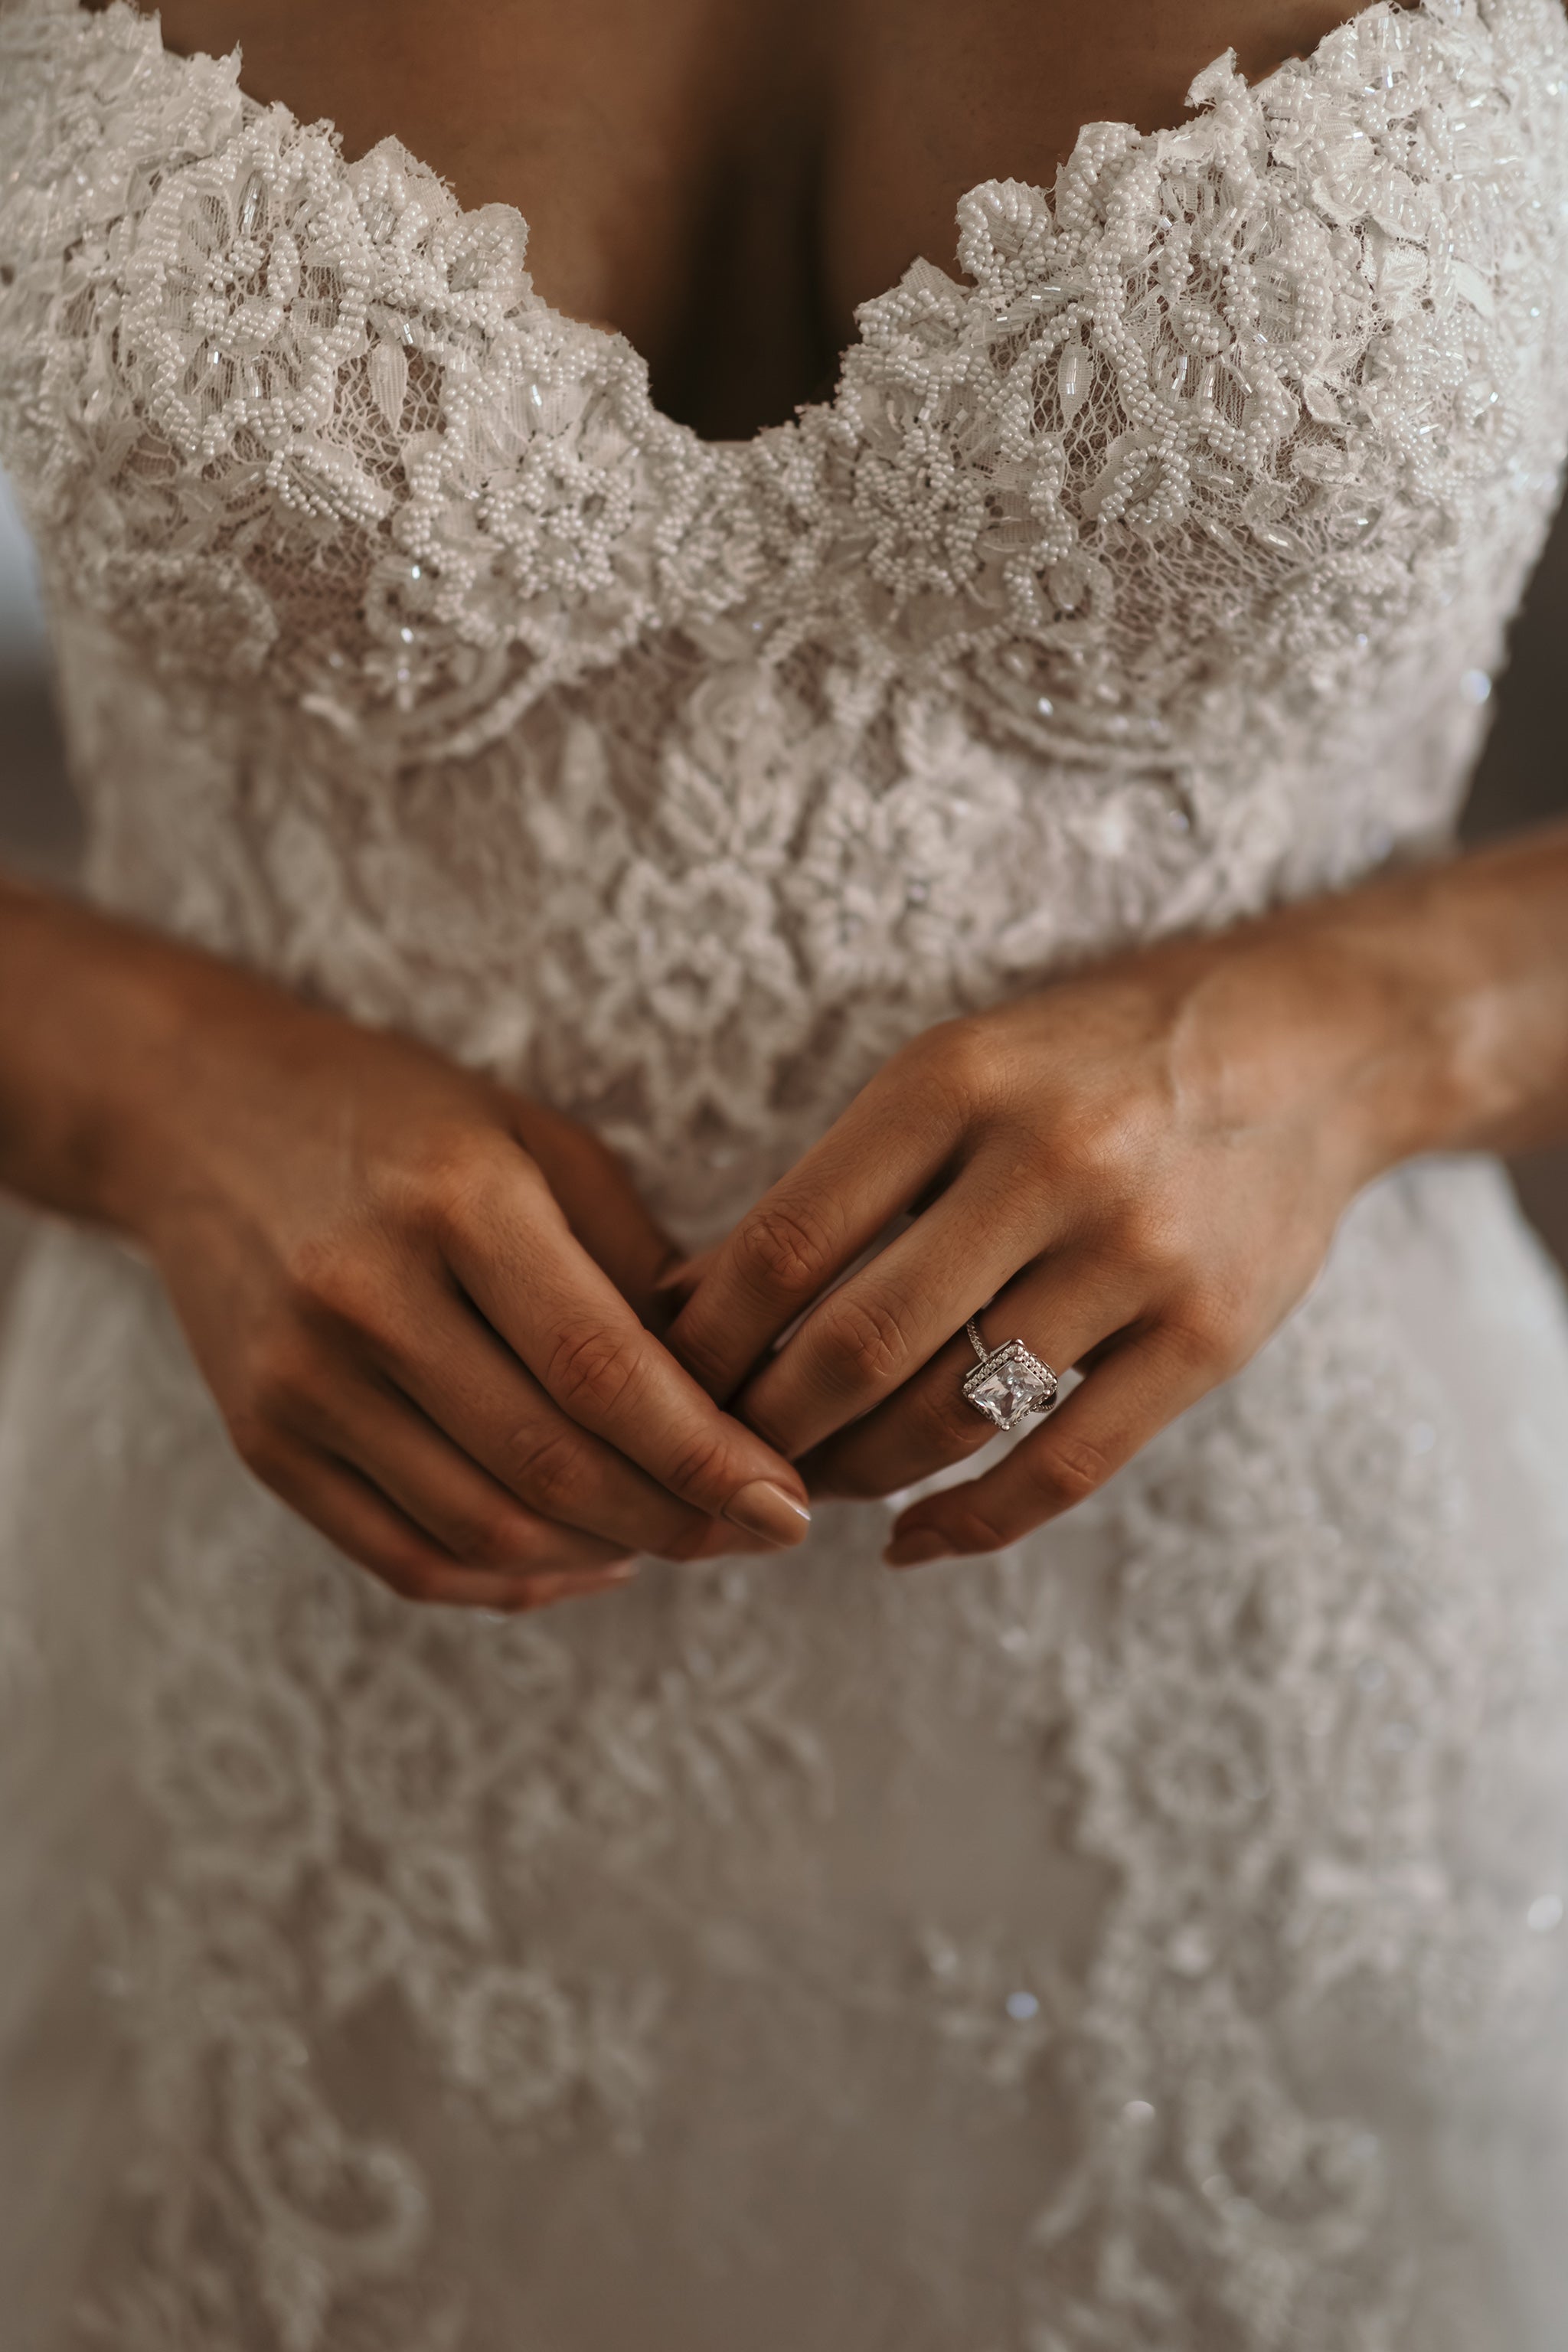 The Complete Guide To Wedding Dress Alterations by Euphorie Studios